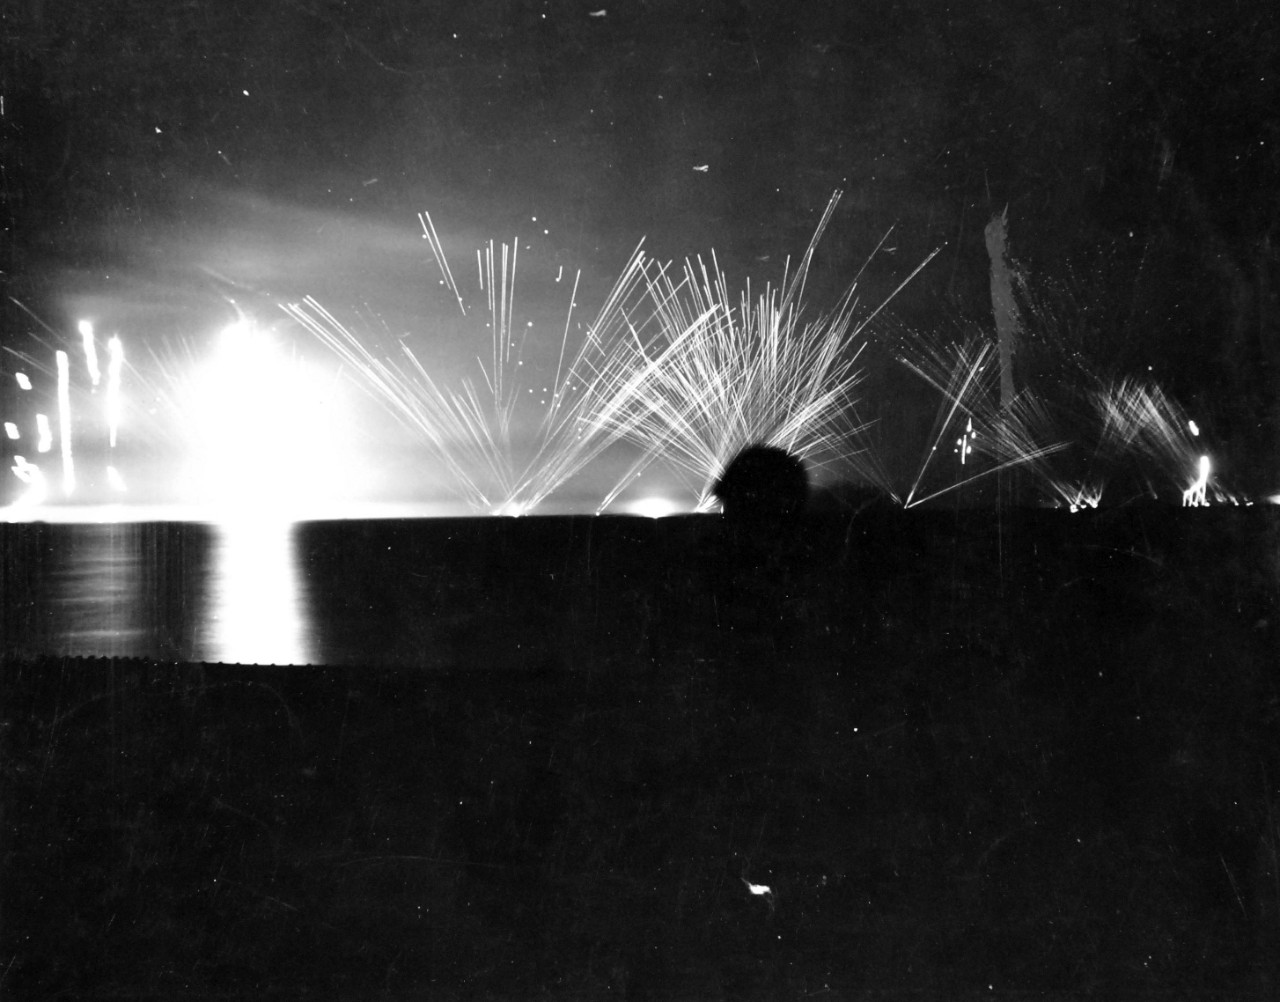 80-G-87329:  Operation Avalanche, September 1943.  Anti-aircraft fire during a night raid in the Gulf of Salerno, Italy.  Photograph released September 12, 1943.   U.S. Navy photograph, now in the collections of the National Archives.  (2017/04/04).